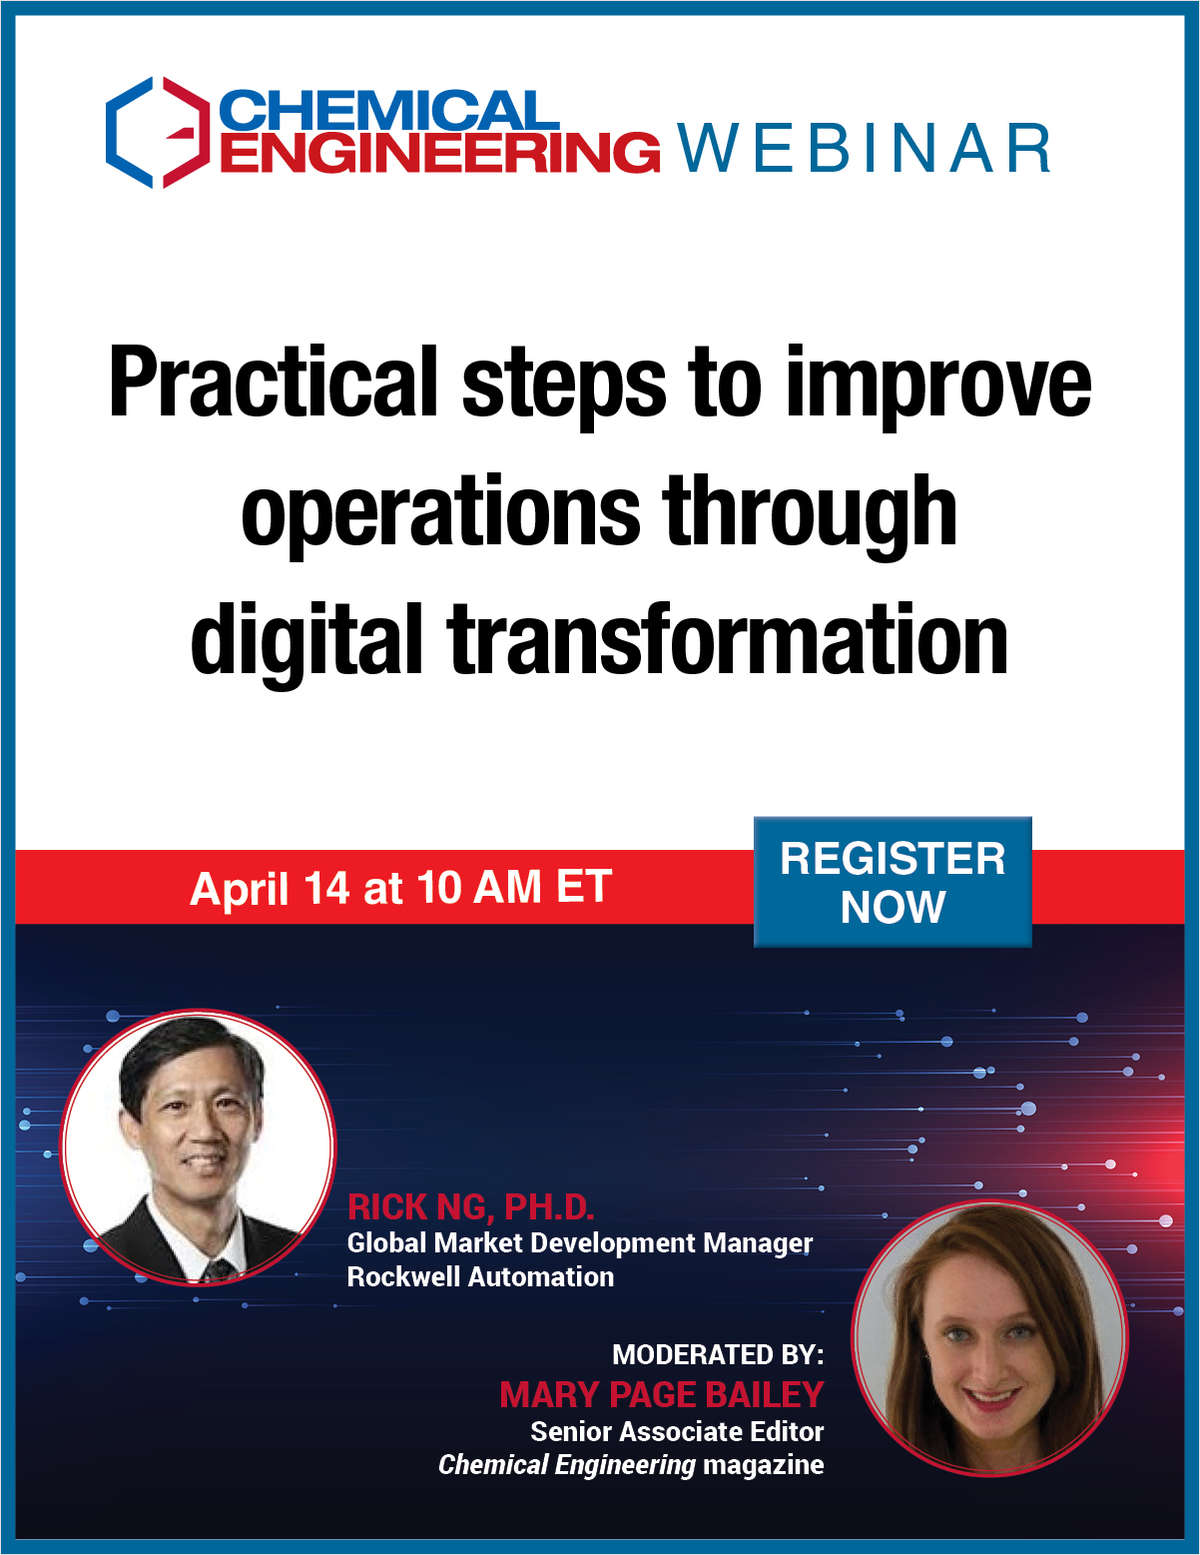 Practical steps to improve operations through digital transformation